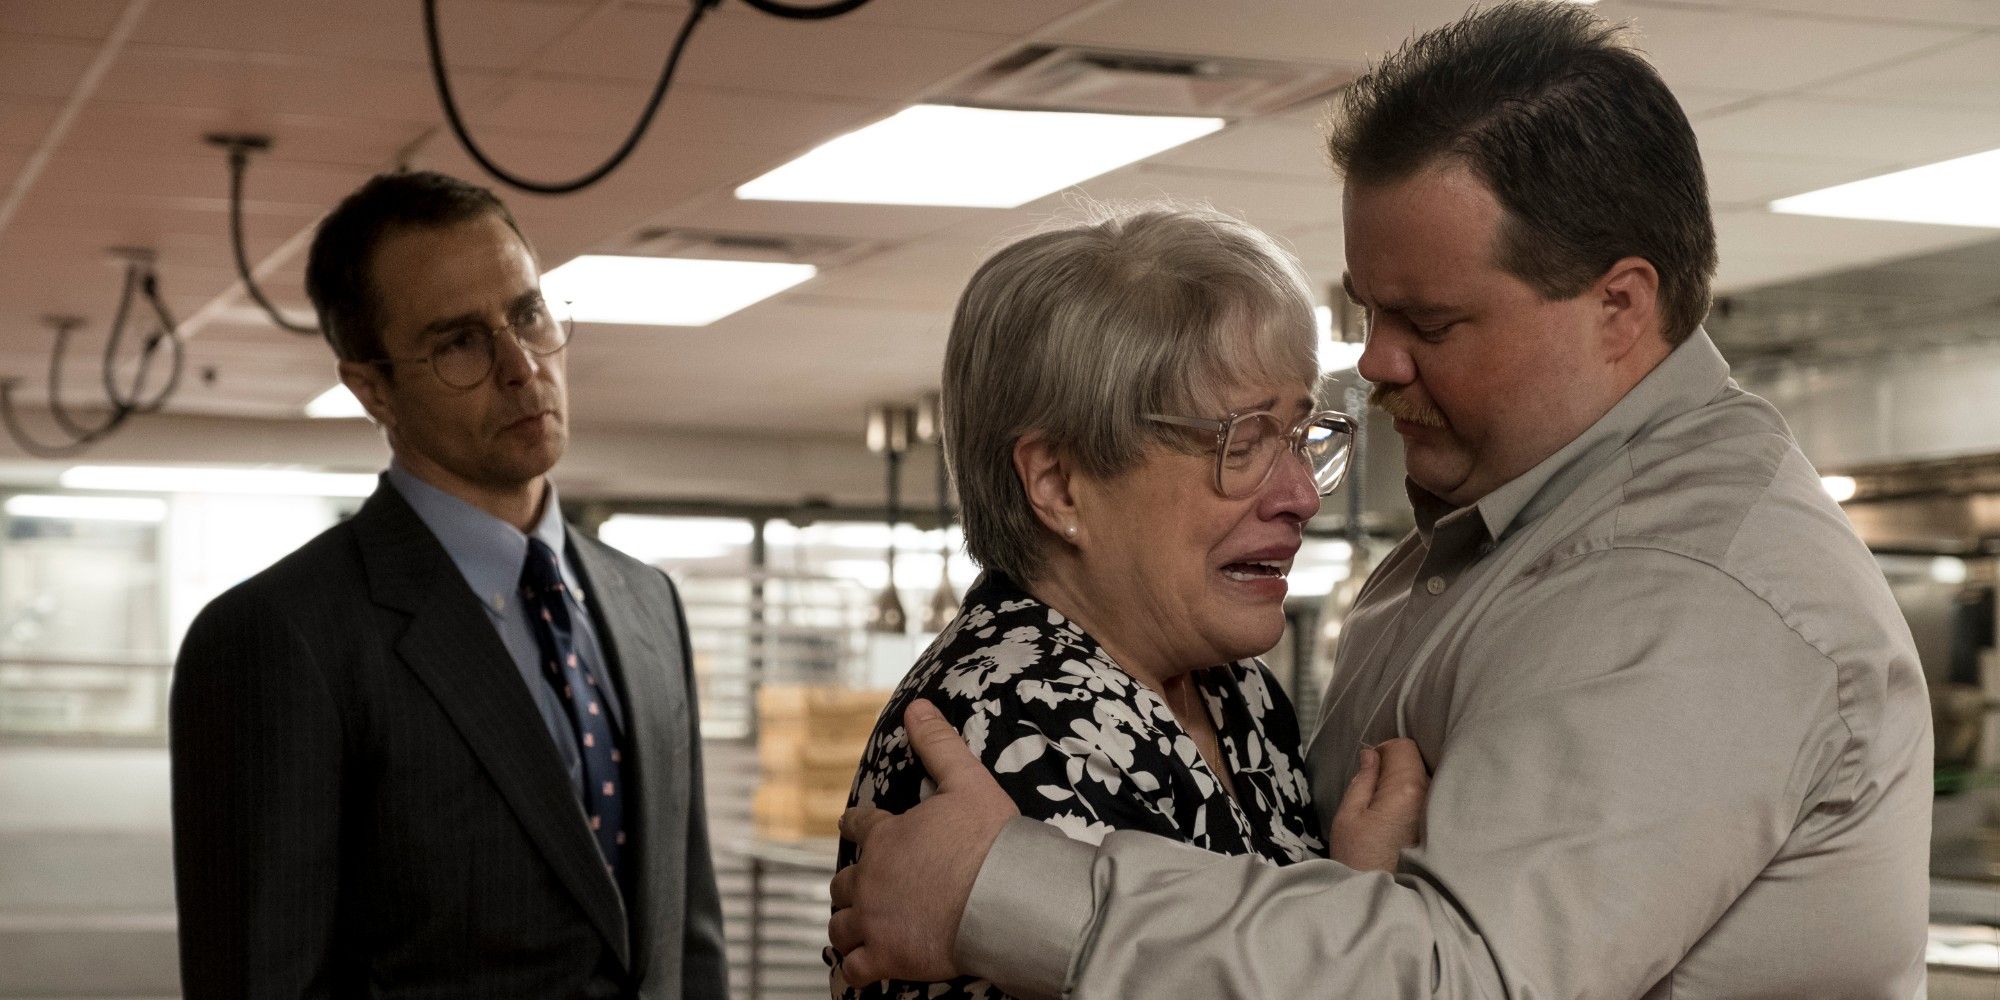 Sam Rockwell, Kathy Bates, and Paul Walter Hauser in Richard Jewell